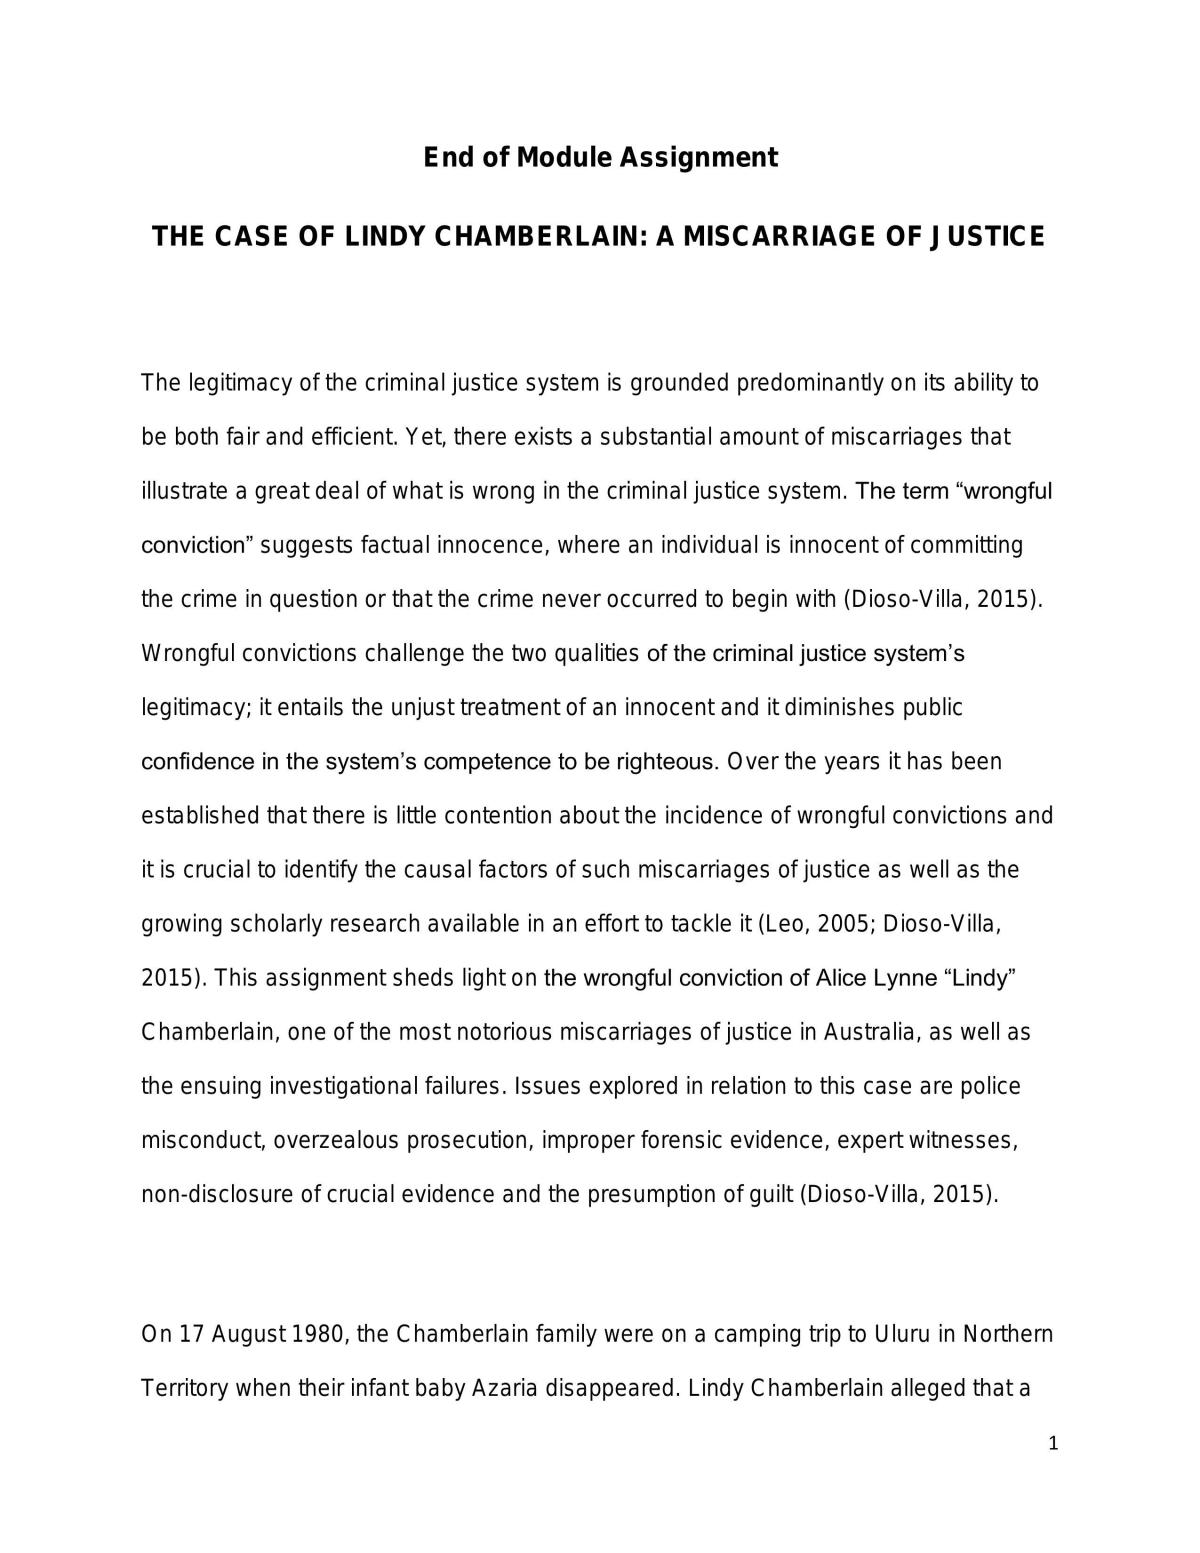 essay on miscarriage of justice